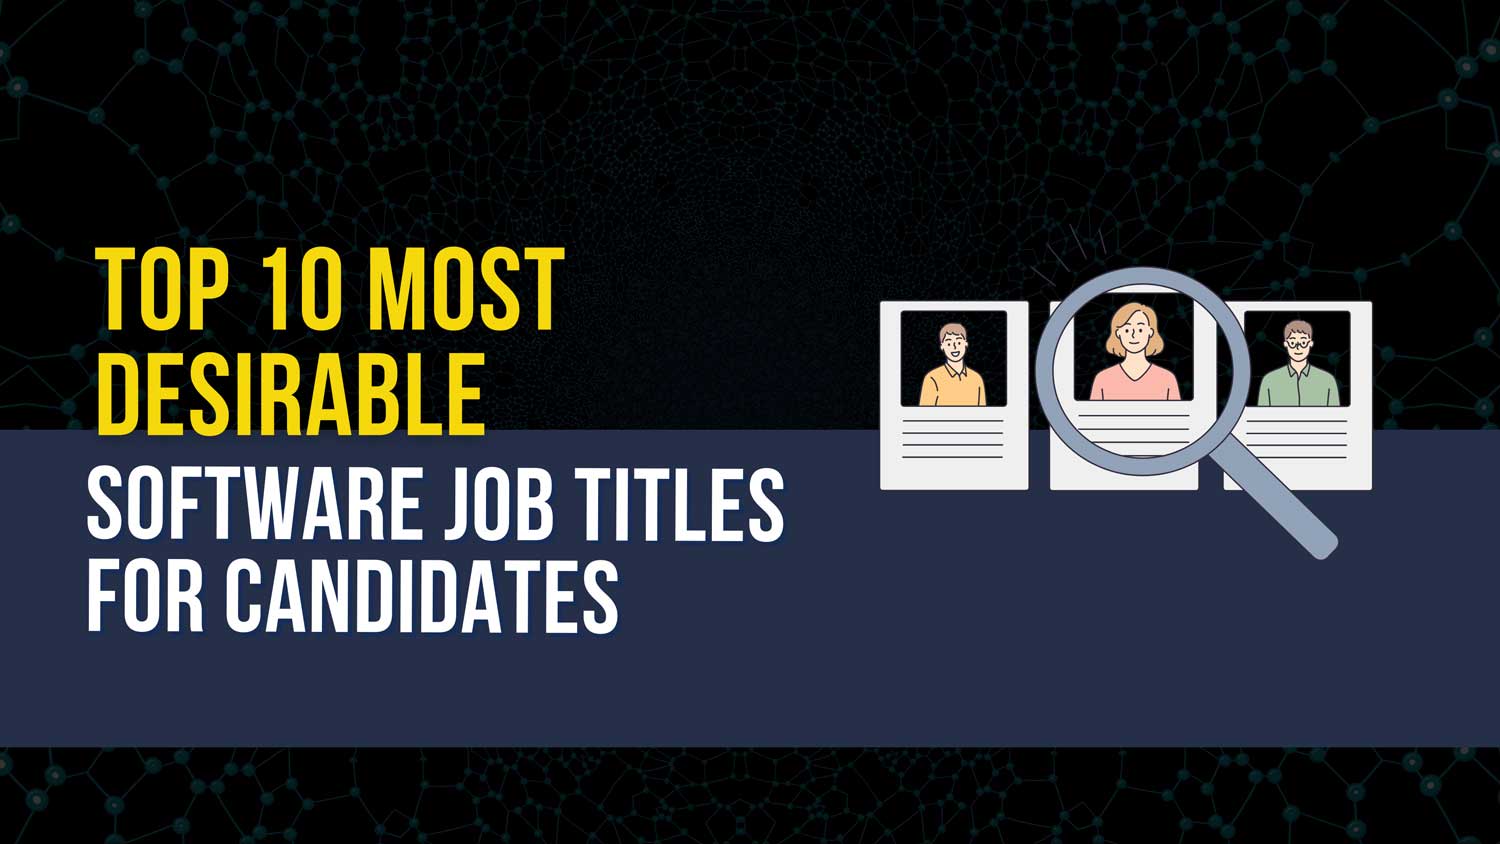 software job titles ranked by what candidates want featured